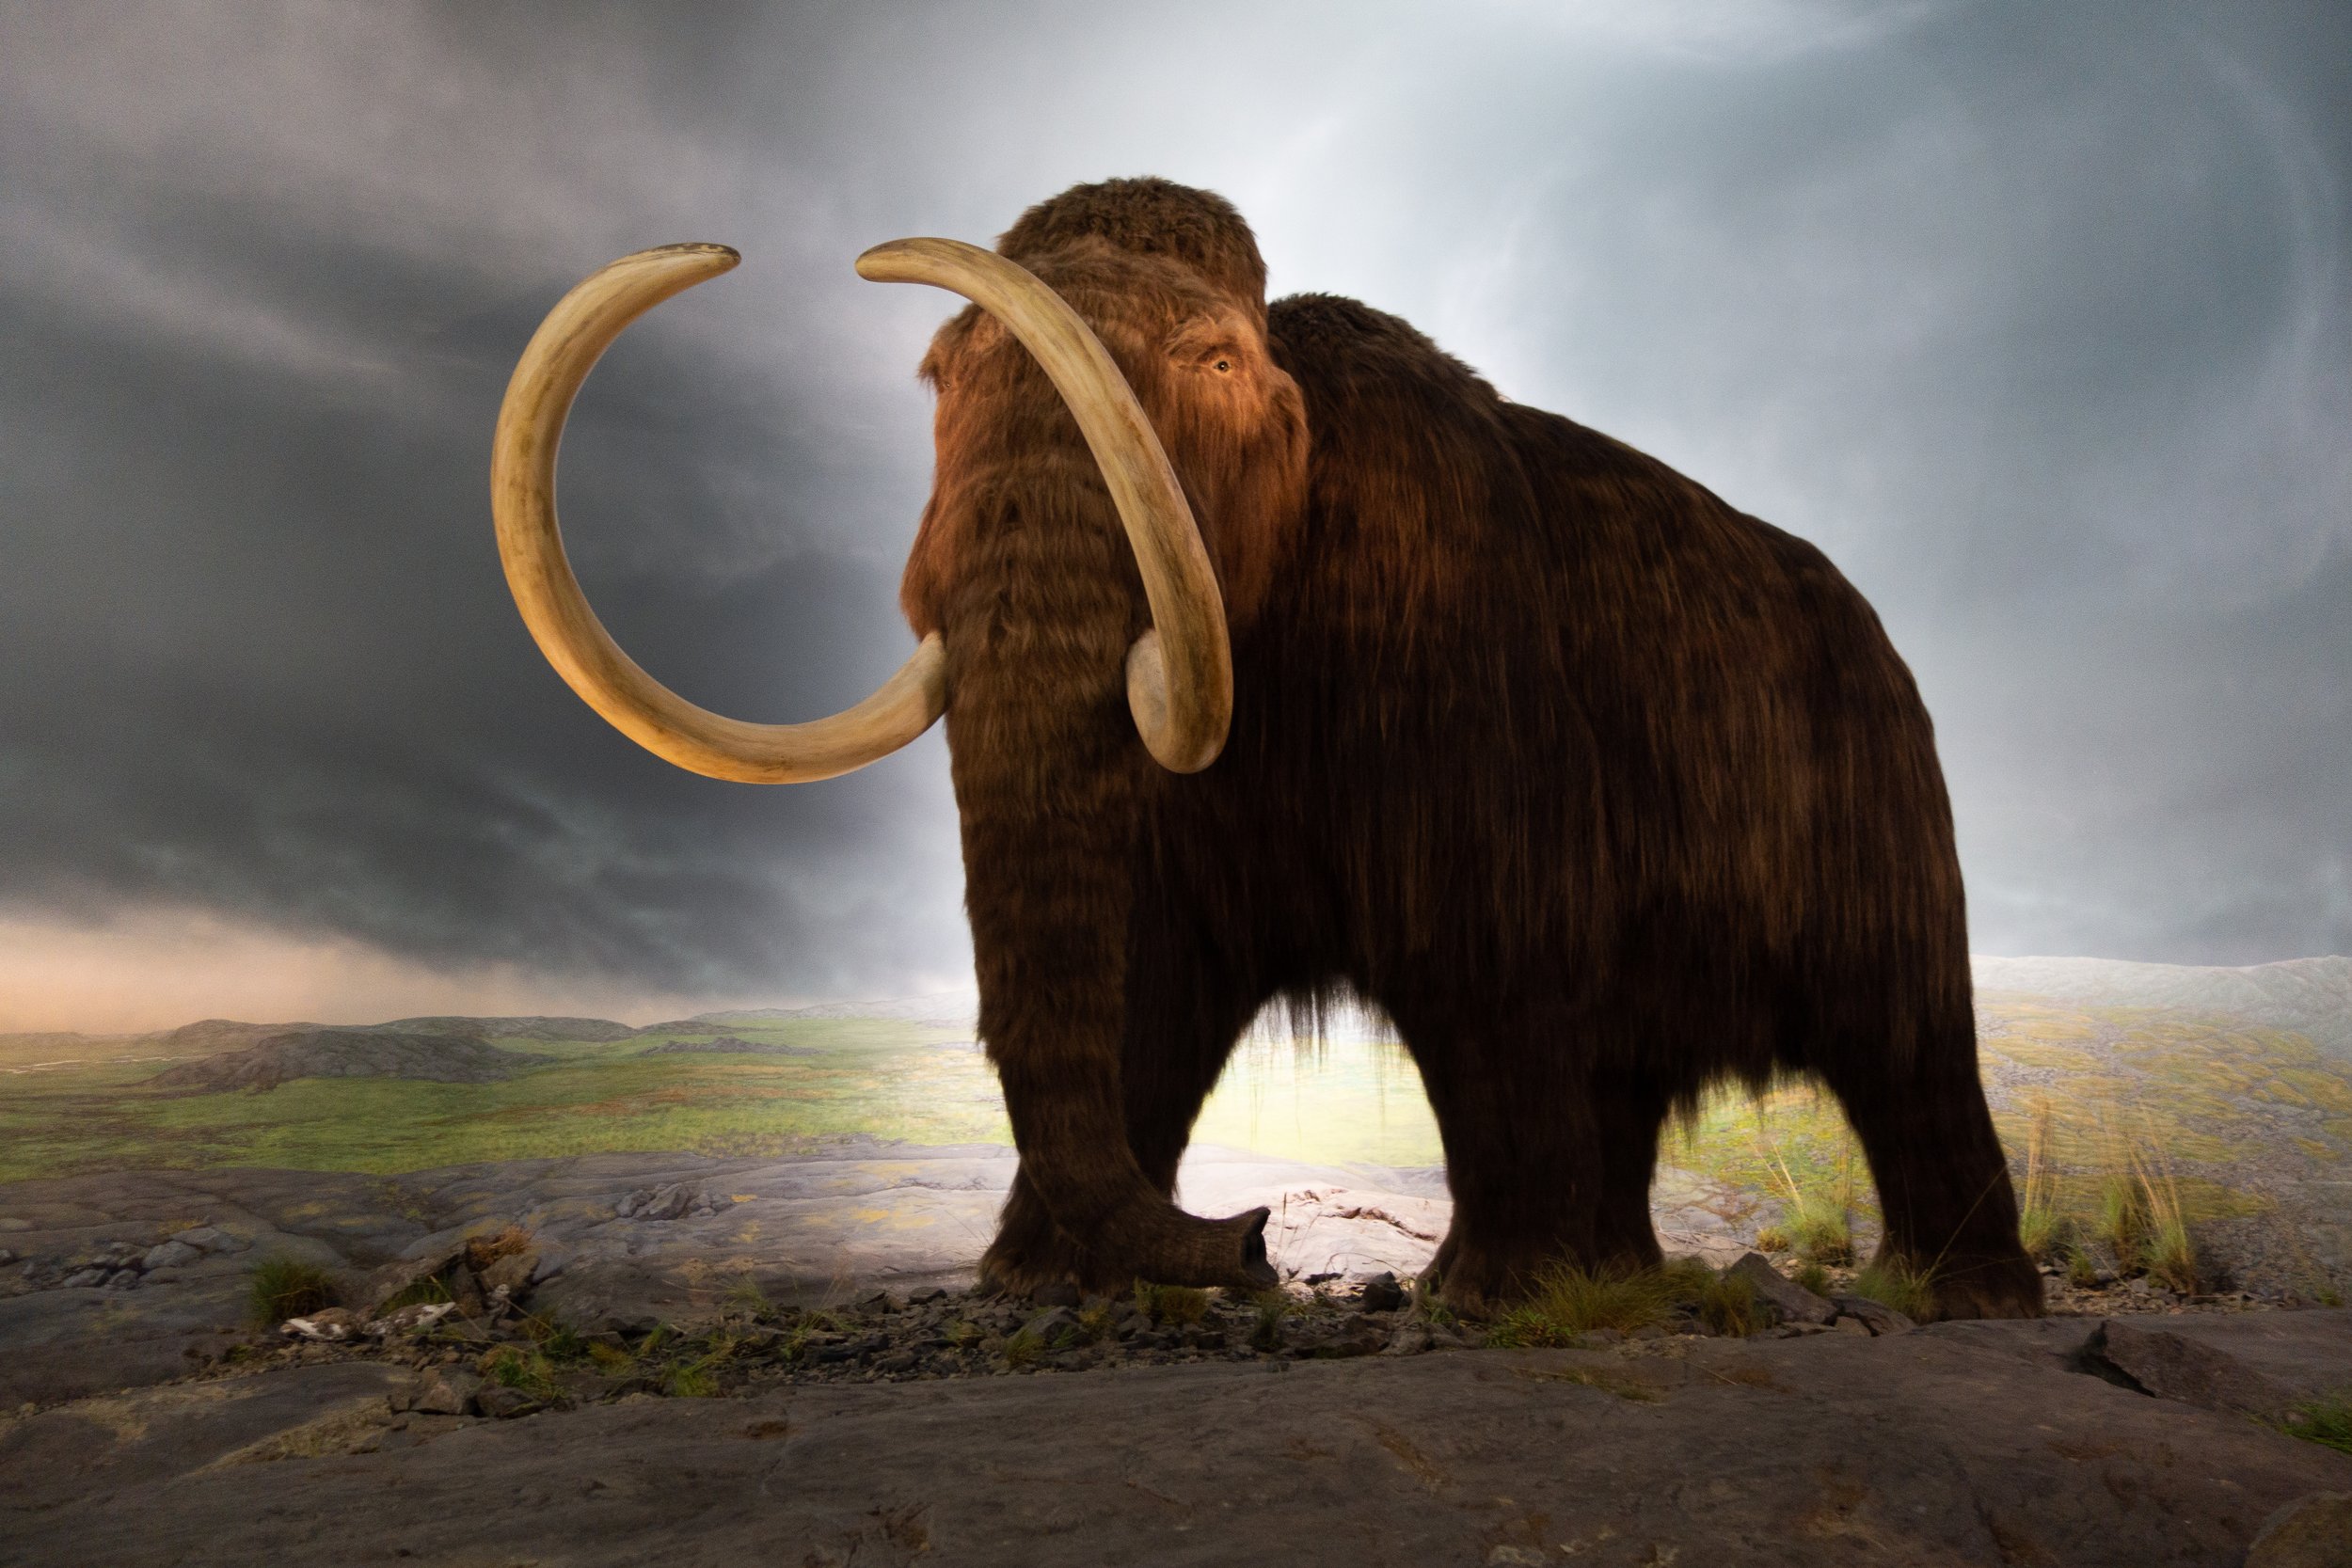 A life-size model of a woolly mammoth standing against a dramatic prehistoric landscape backdrop transformed by human activity.